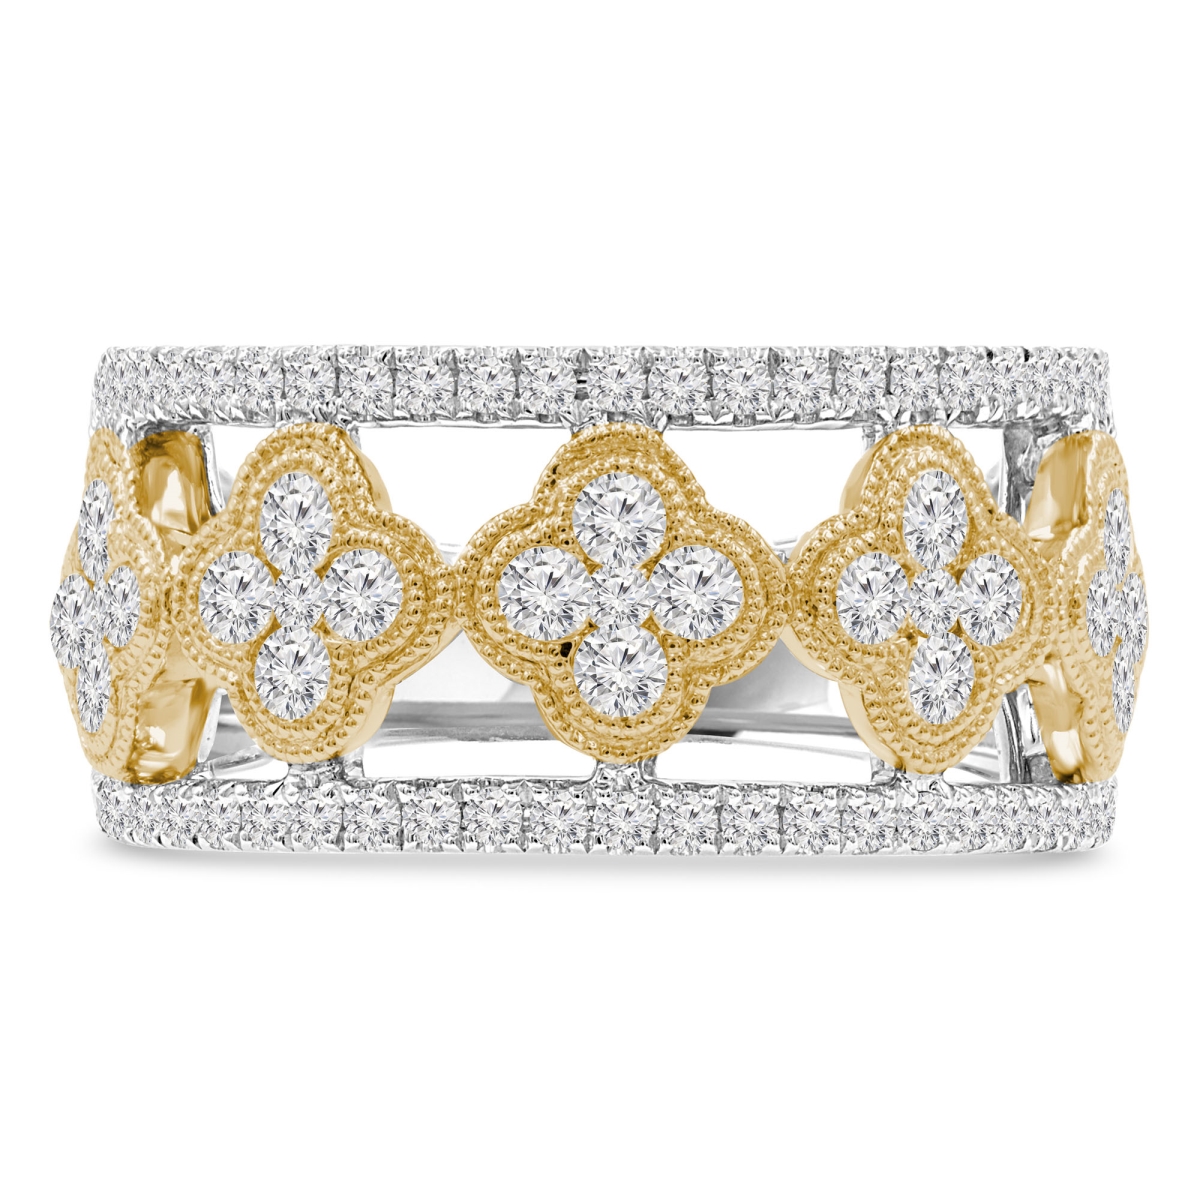 Picture of Majesty Diamonds MDR210140-8 1 CTW Round Diamond Cocktail Ring in 14K Two-Tone Gold - Size 8